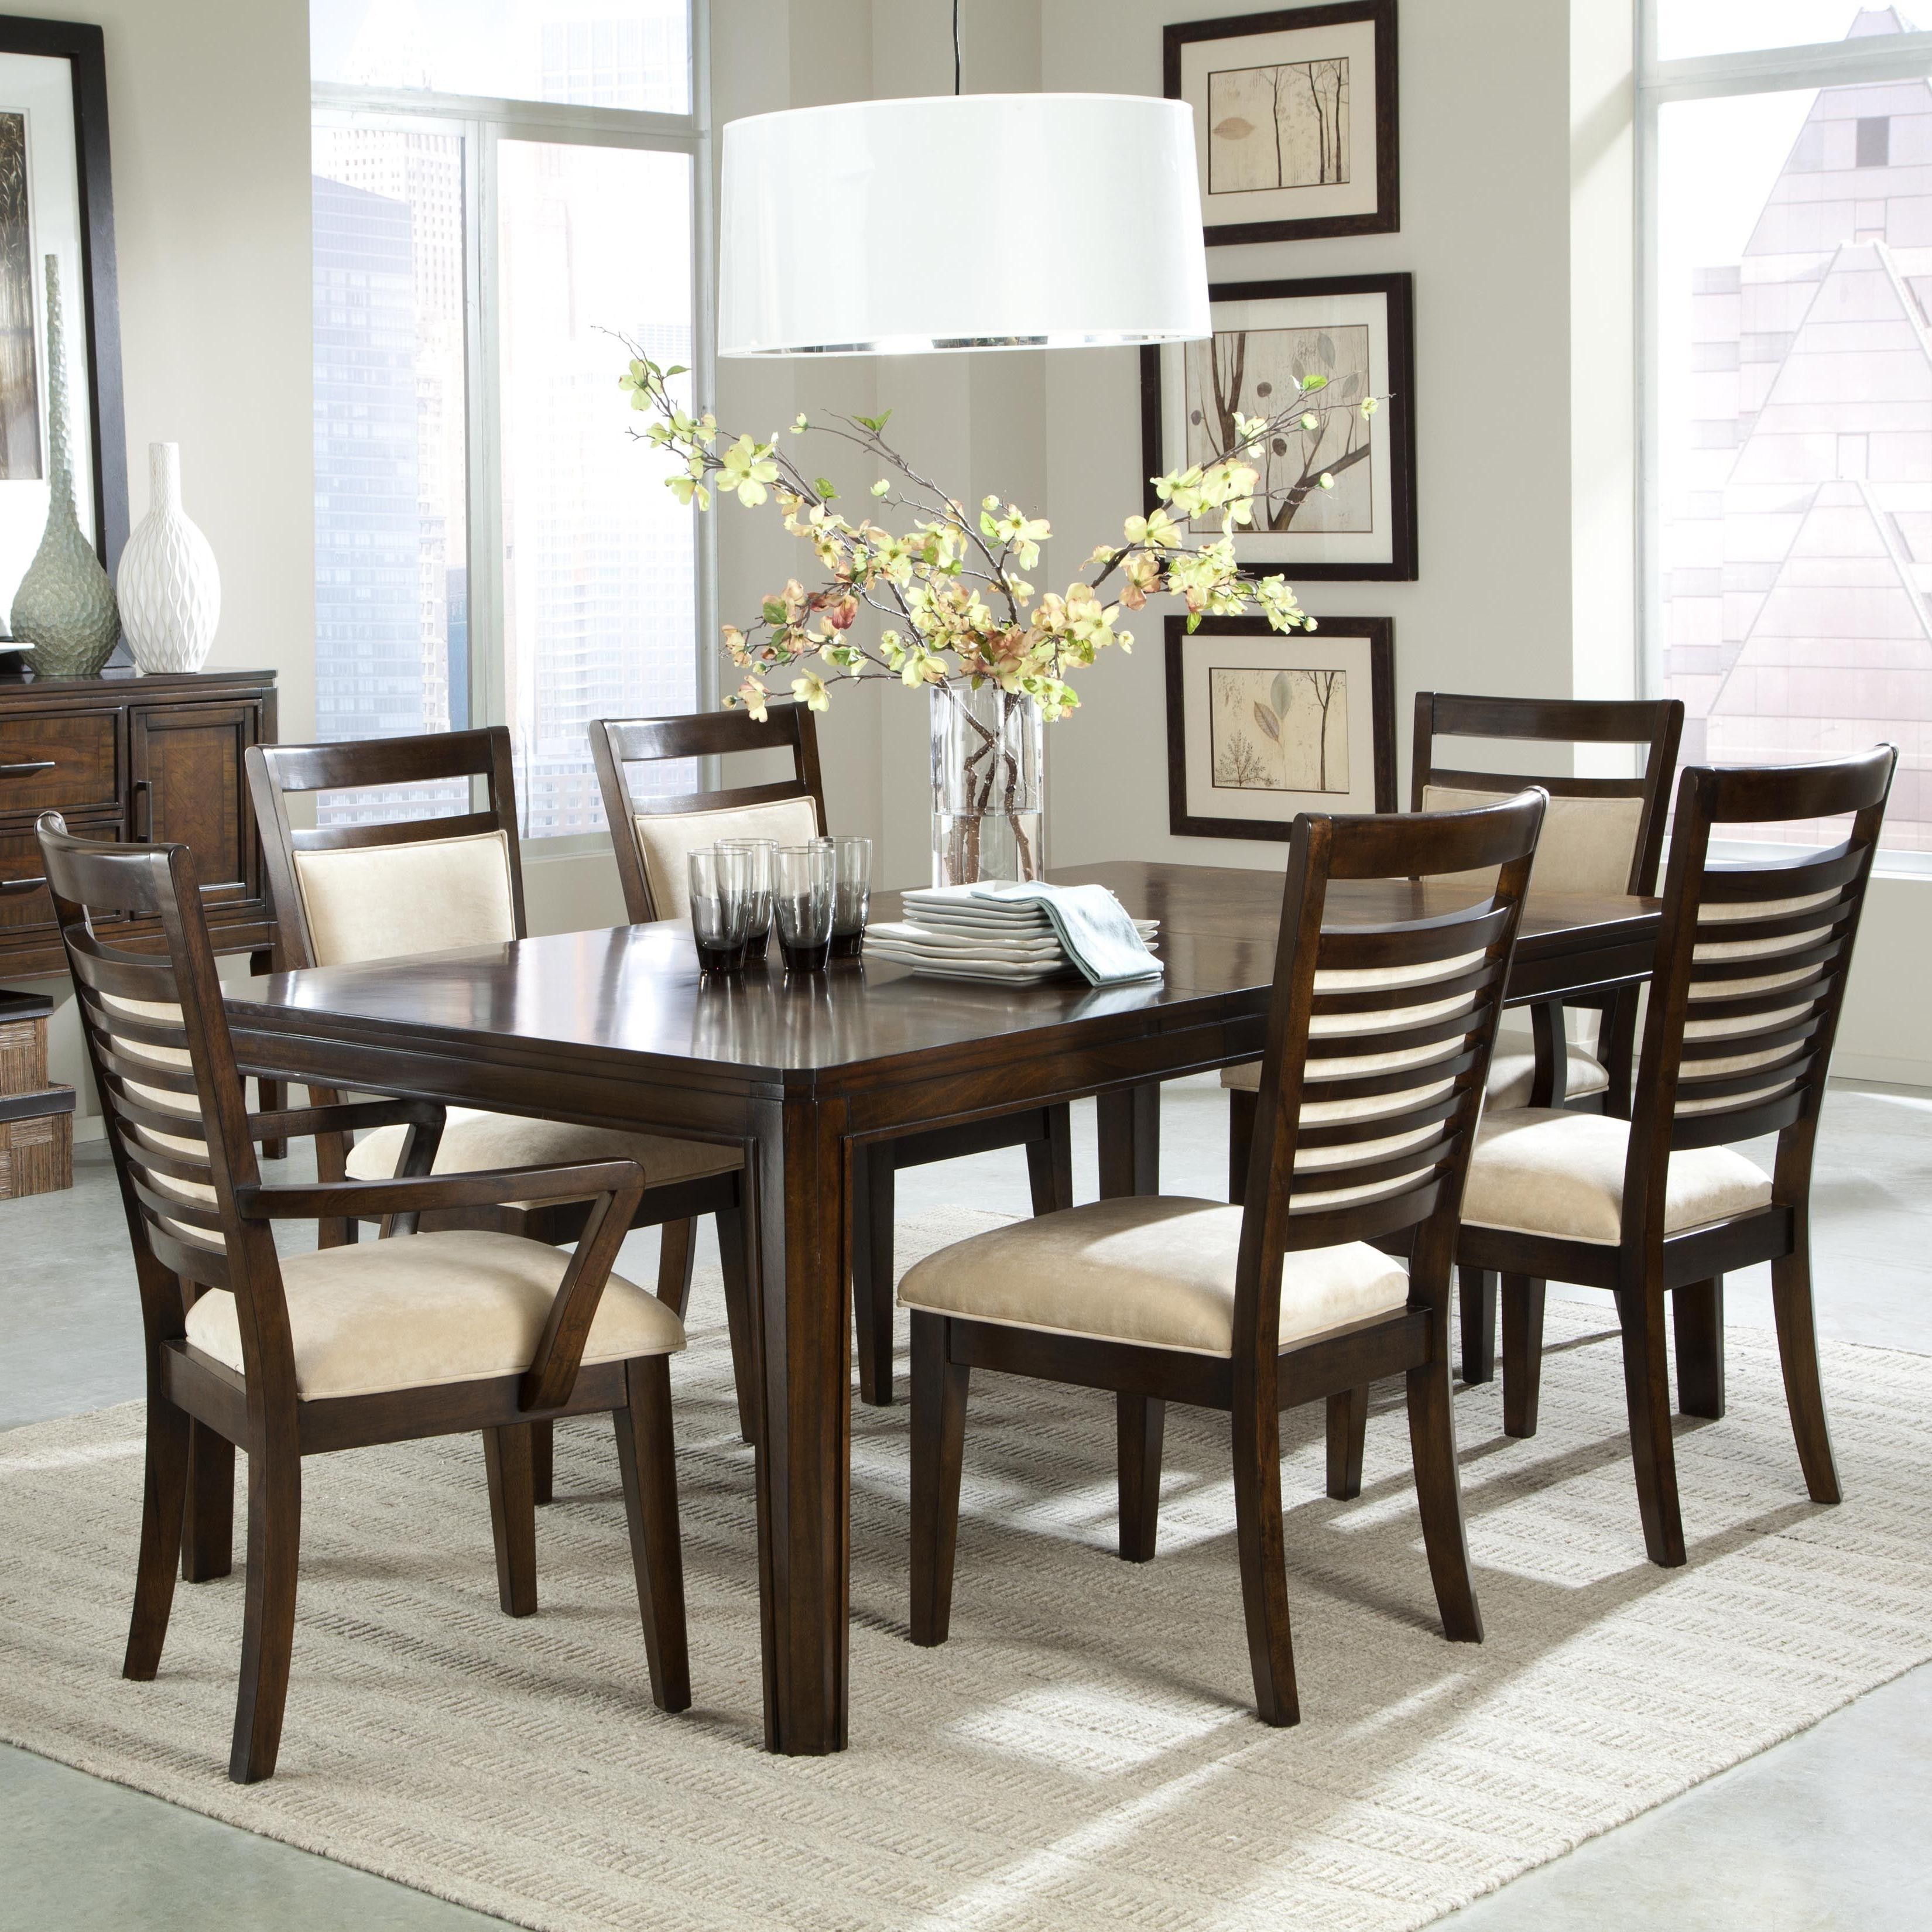 Dining Table Upholstered Chairs Unique The Pemberleigh Round Table Within Newest Jaxon 7 Piece Rectangle Dining Sets With Upholstered Chairs (View 19 of 20)